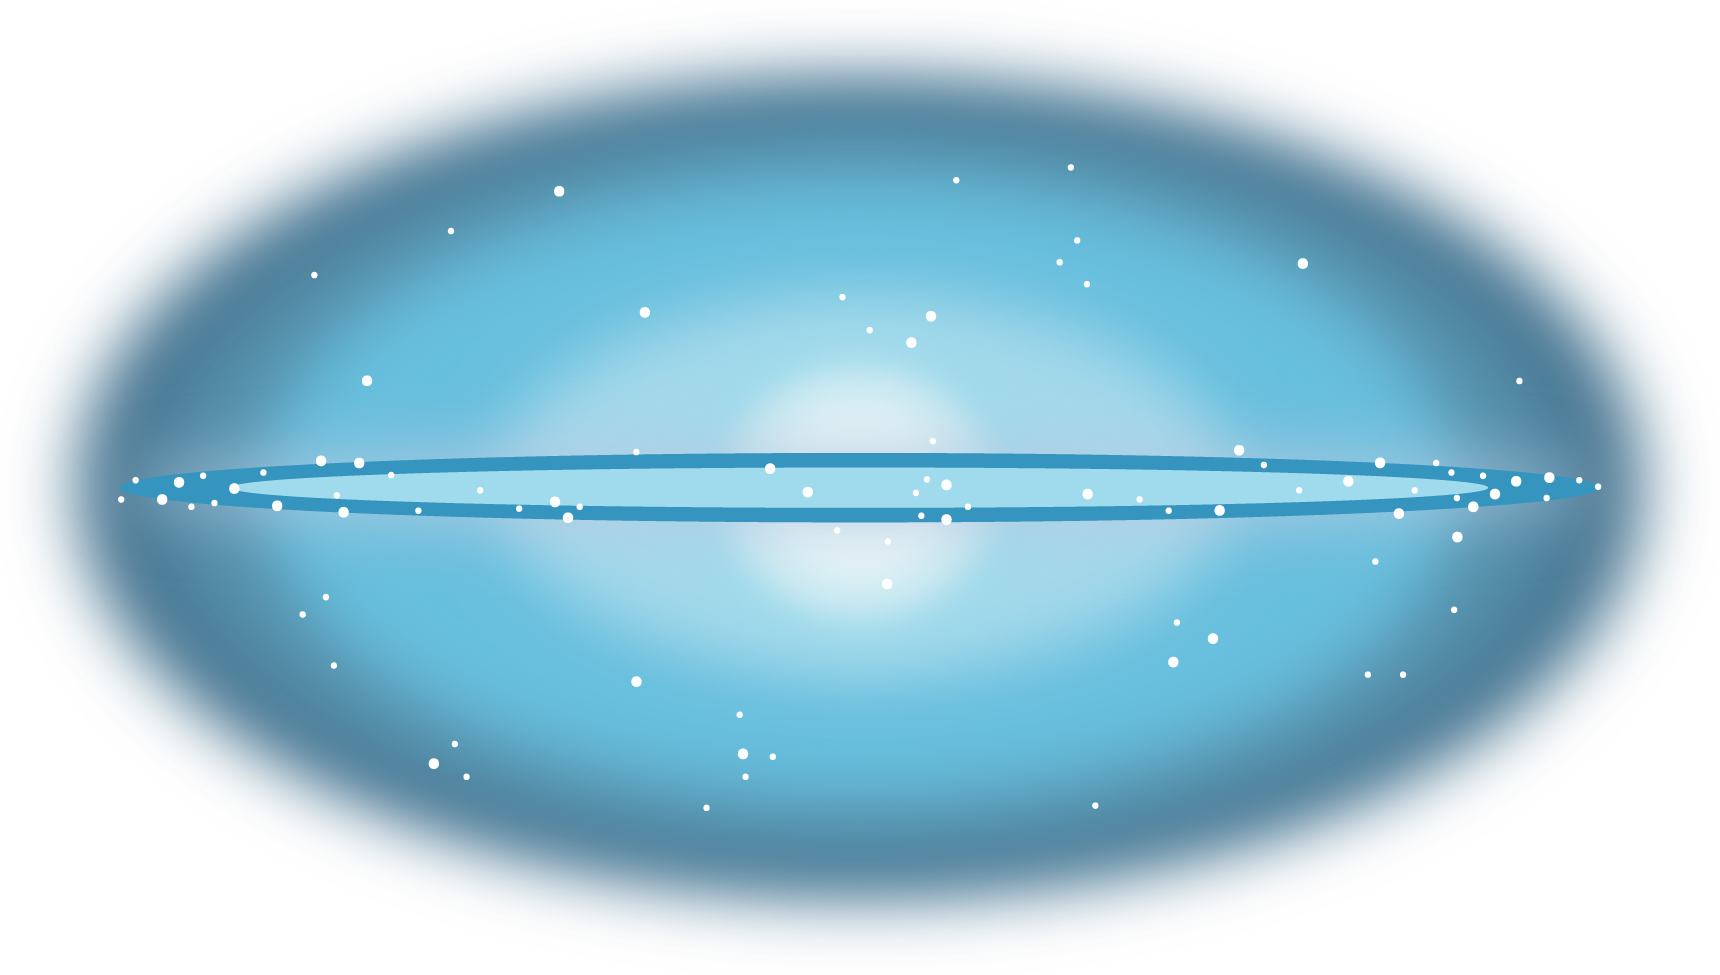 A horizontal oval is outlined by diffused, dark blue surrounding a brighter blue which fades to be lighter and brighter as it moves inward. The center of the shape is a hazy white circle. Cutting across the center of the image is a flattened disc outlined in dark blue with a light blue center. White dots representing stars speckle the image.